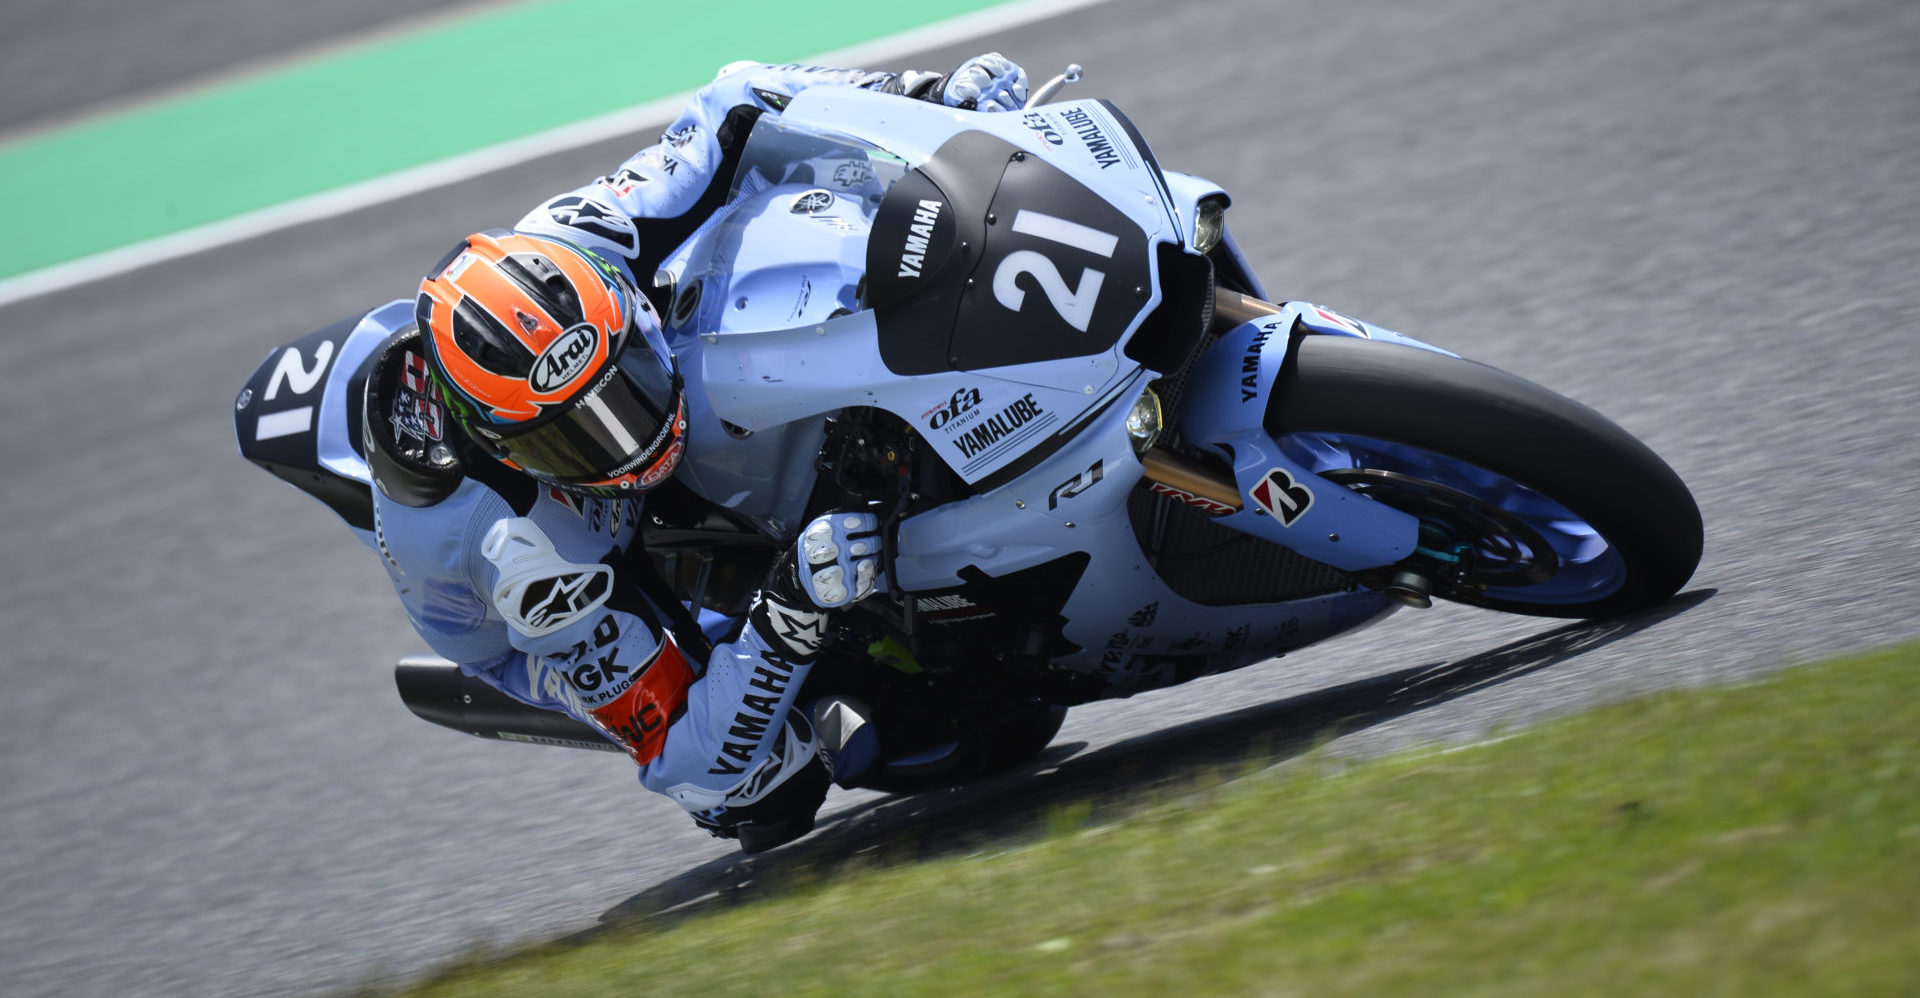 Michael van der Mark (21), seen here in action during the 2019 Suzuka 8-Hours race, is riding for Yamaha Sepang Racing in the 8 Hours of Sepang. Photo courtesy of Yamaha.